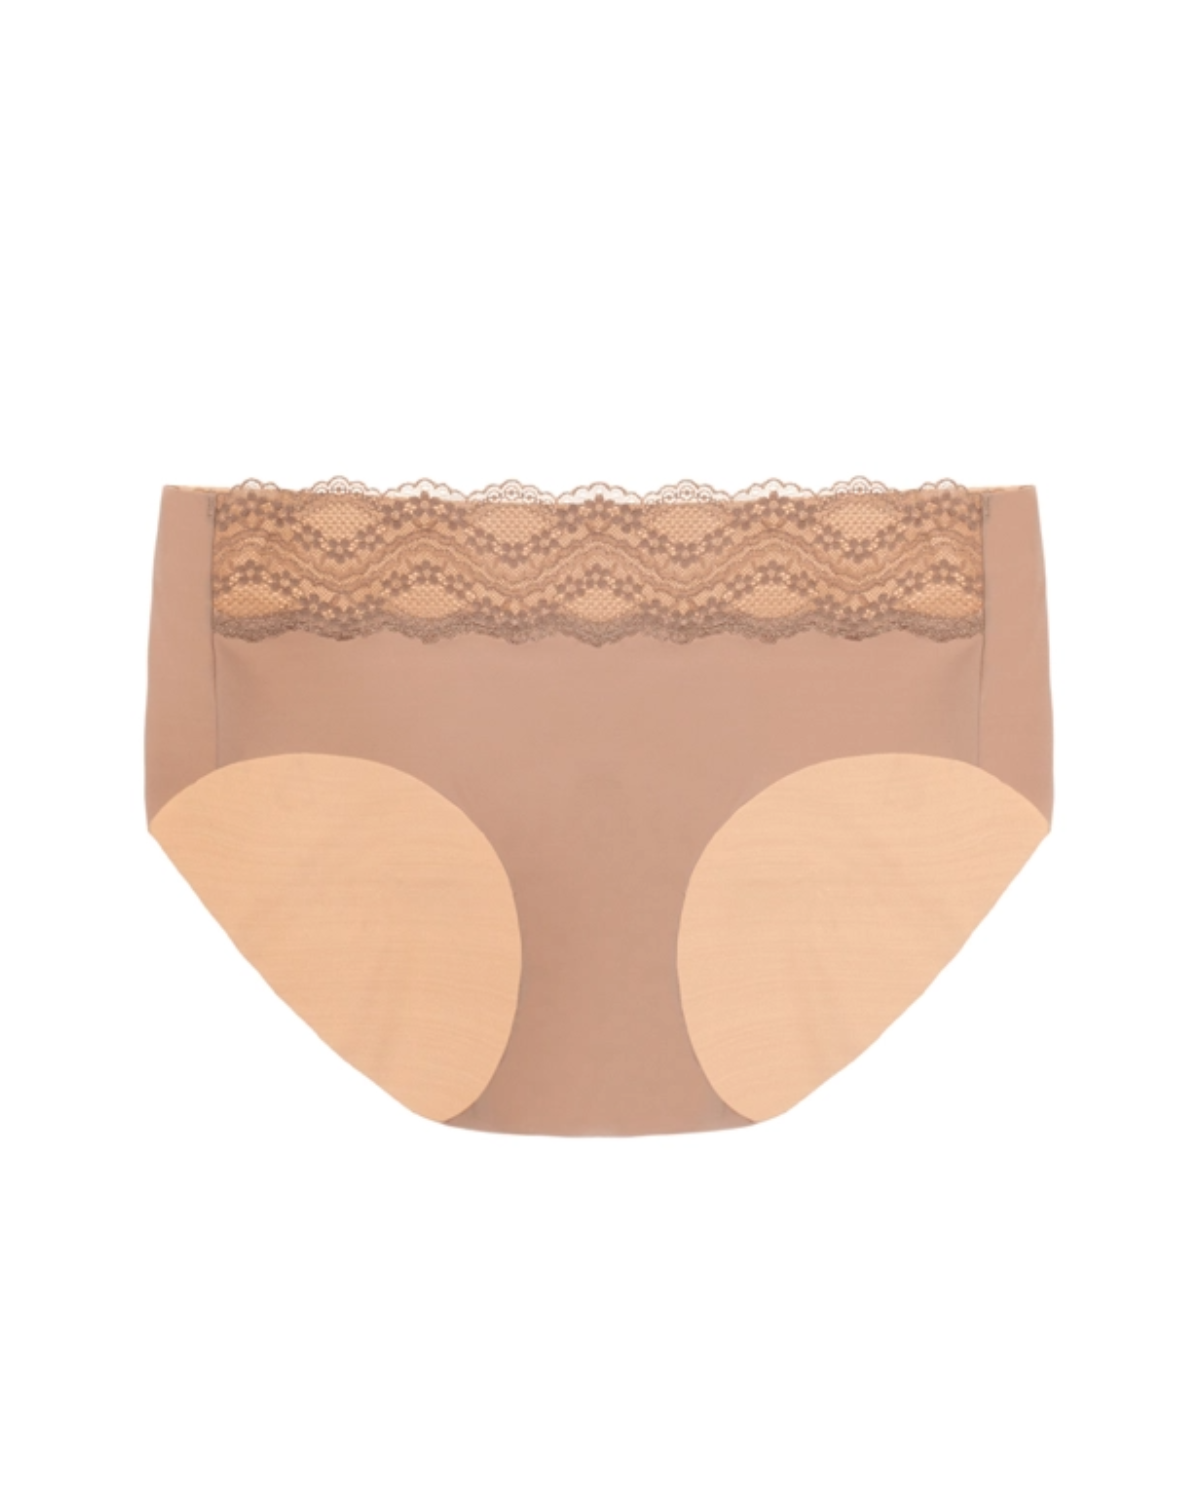 Flat lay on a white backdrop of a beige hipster panty. The front has a lace scallop detail on the band. The back is fully seamless and full coverage